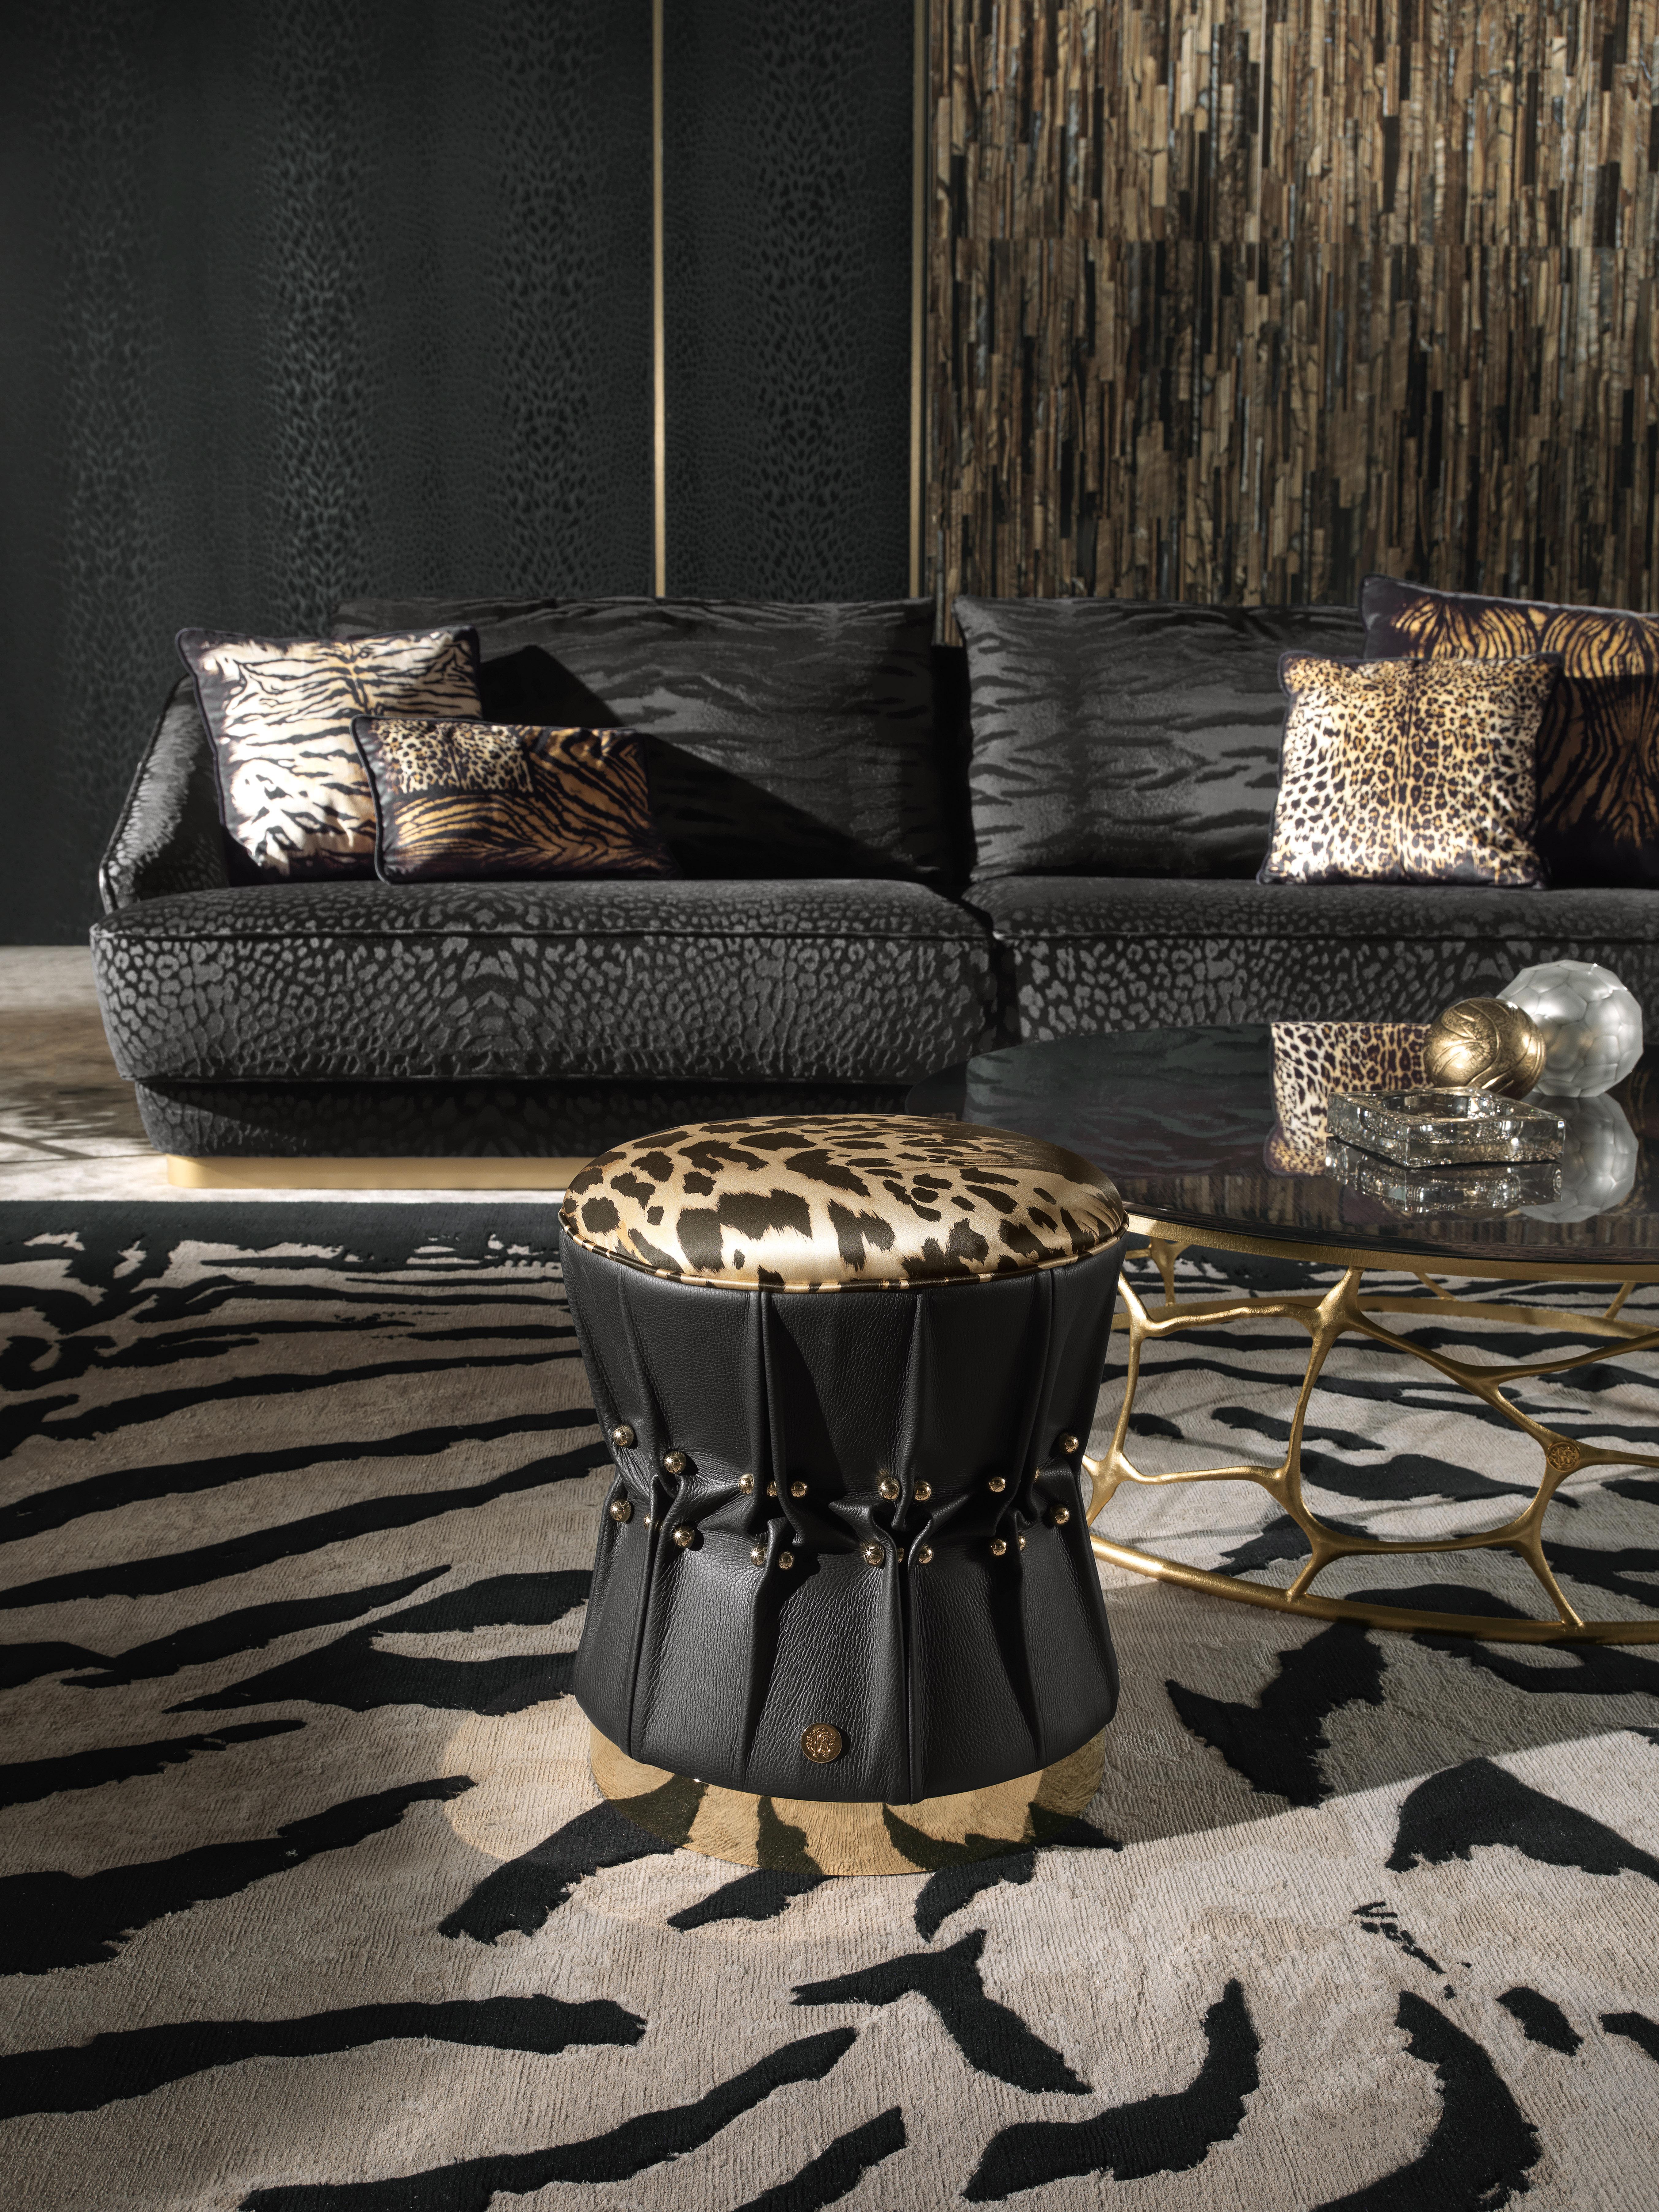 Italian 21st Century Inanda Pouf in Velvet - Leather by Roberto Cavalli Home Interiors  For Sale